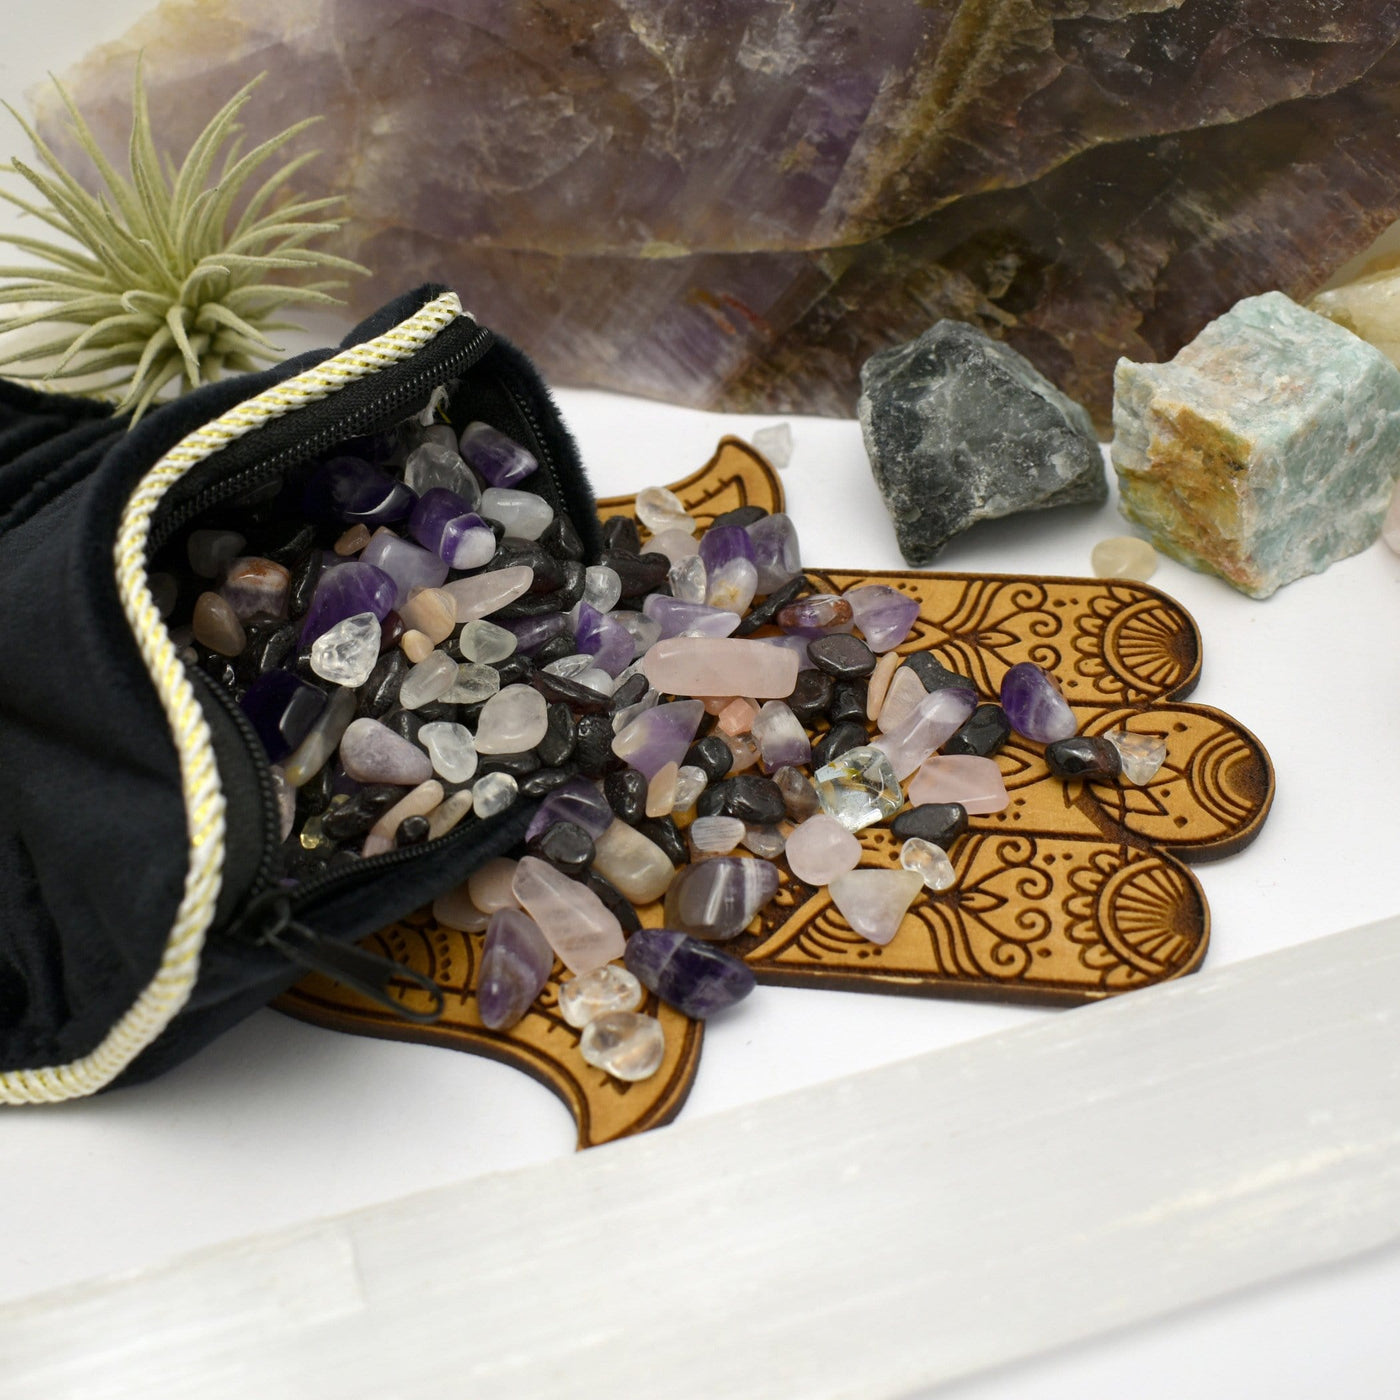 Energetic Pillow filled with amethyst tumbled stones on white background.